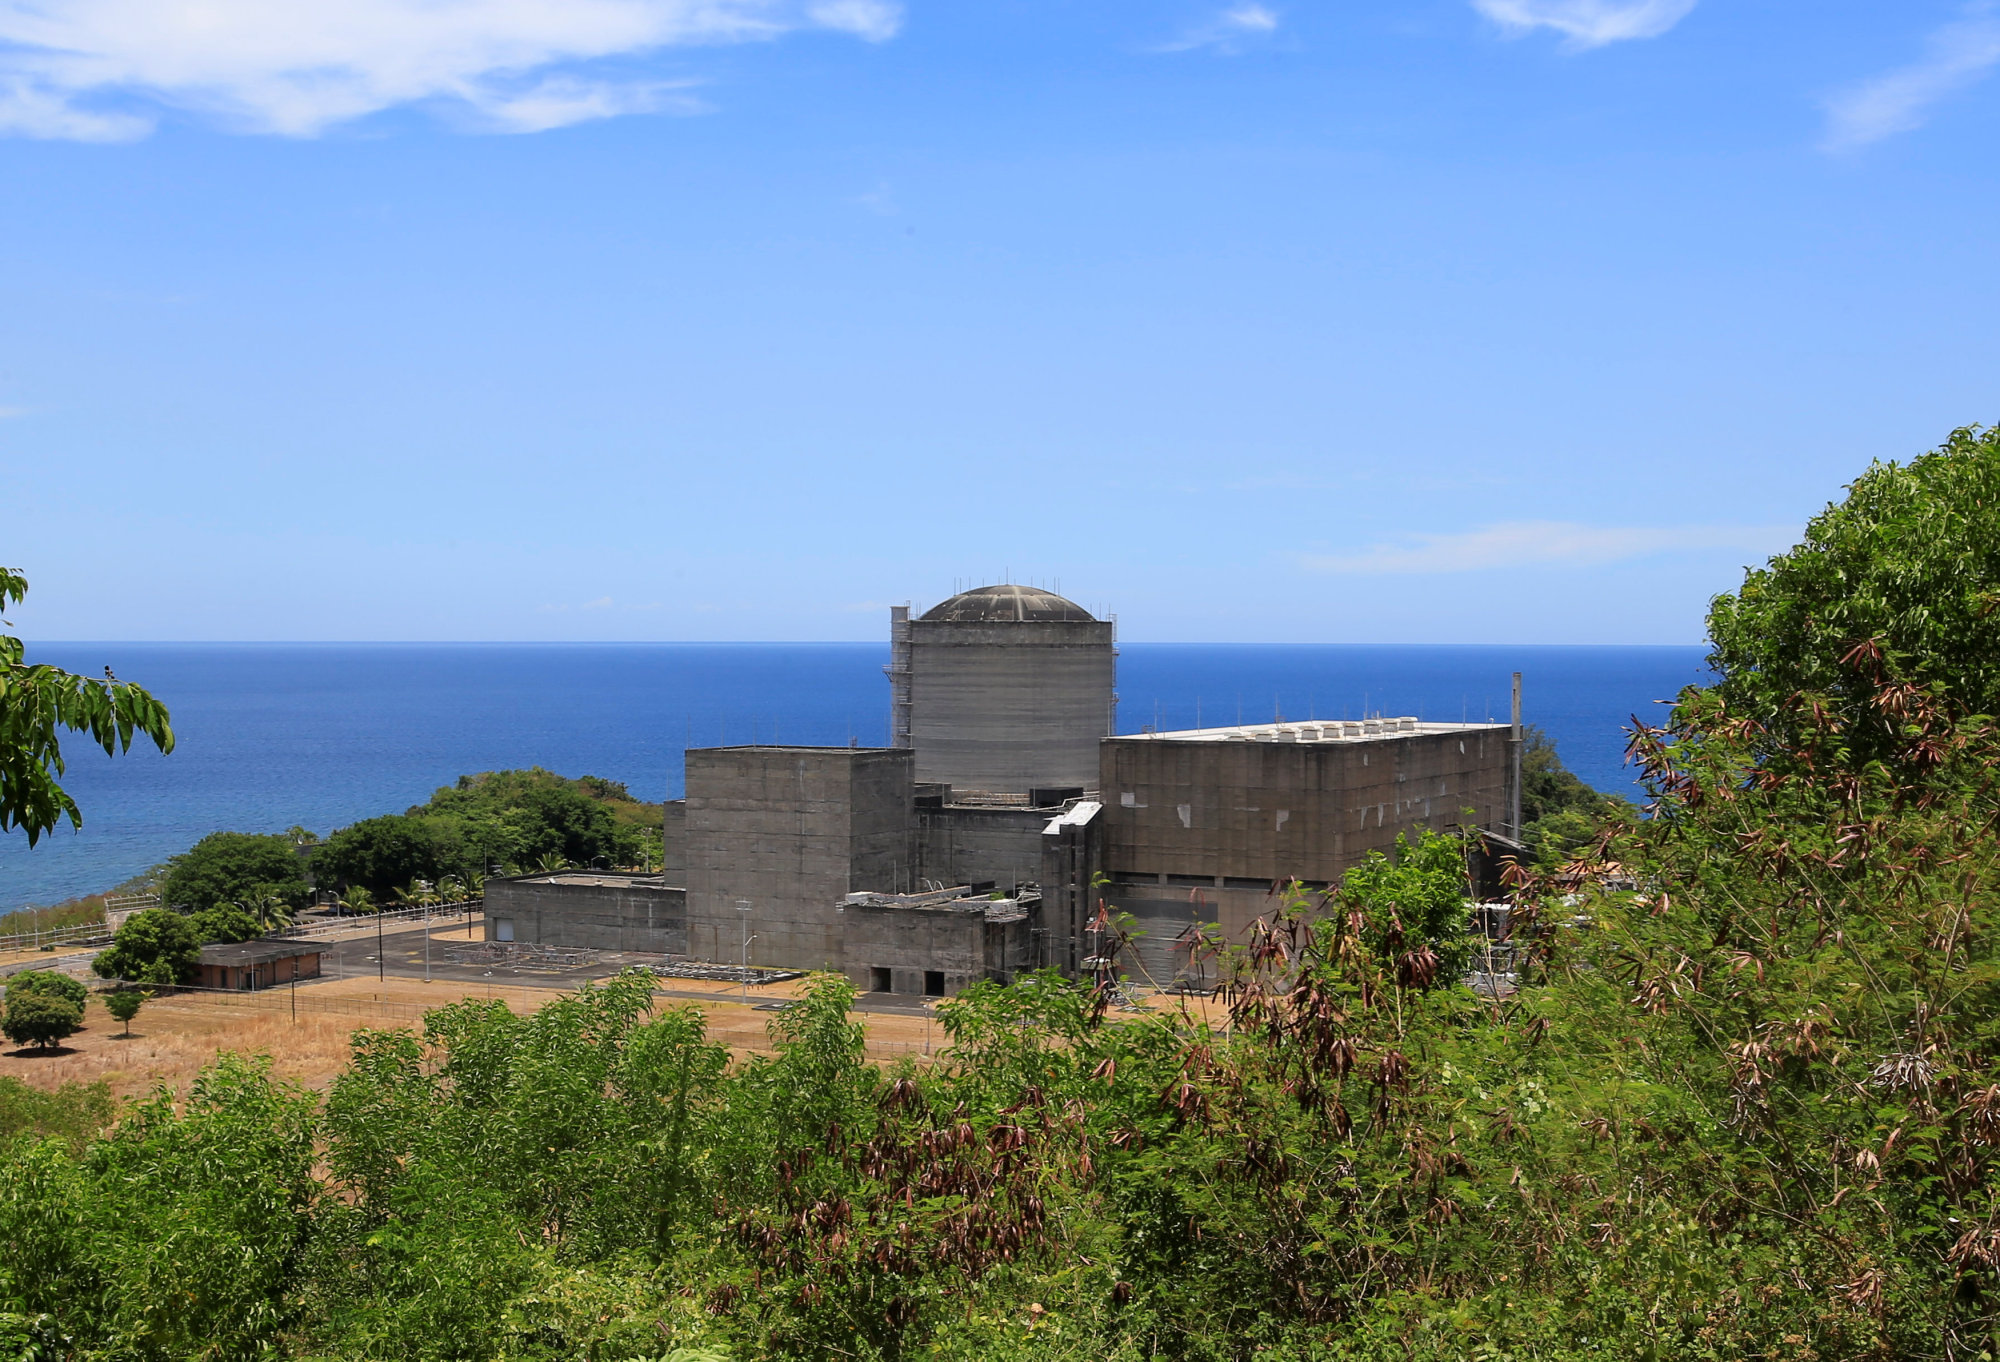 The Bataan Nuclear Power Plant is seen during a tour in the Bataan provincial town of Morong, northwest of Manila, on May 11. | REUTERS